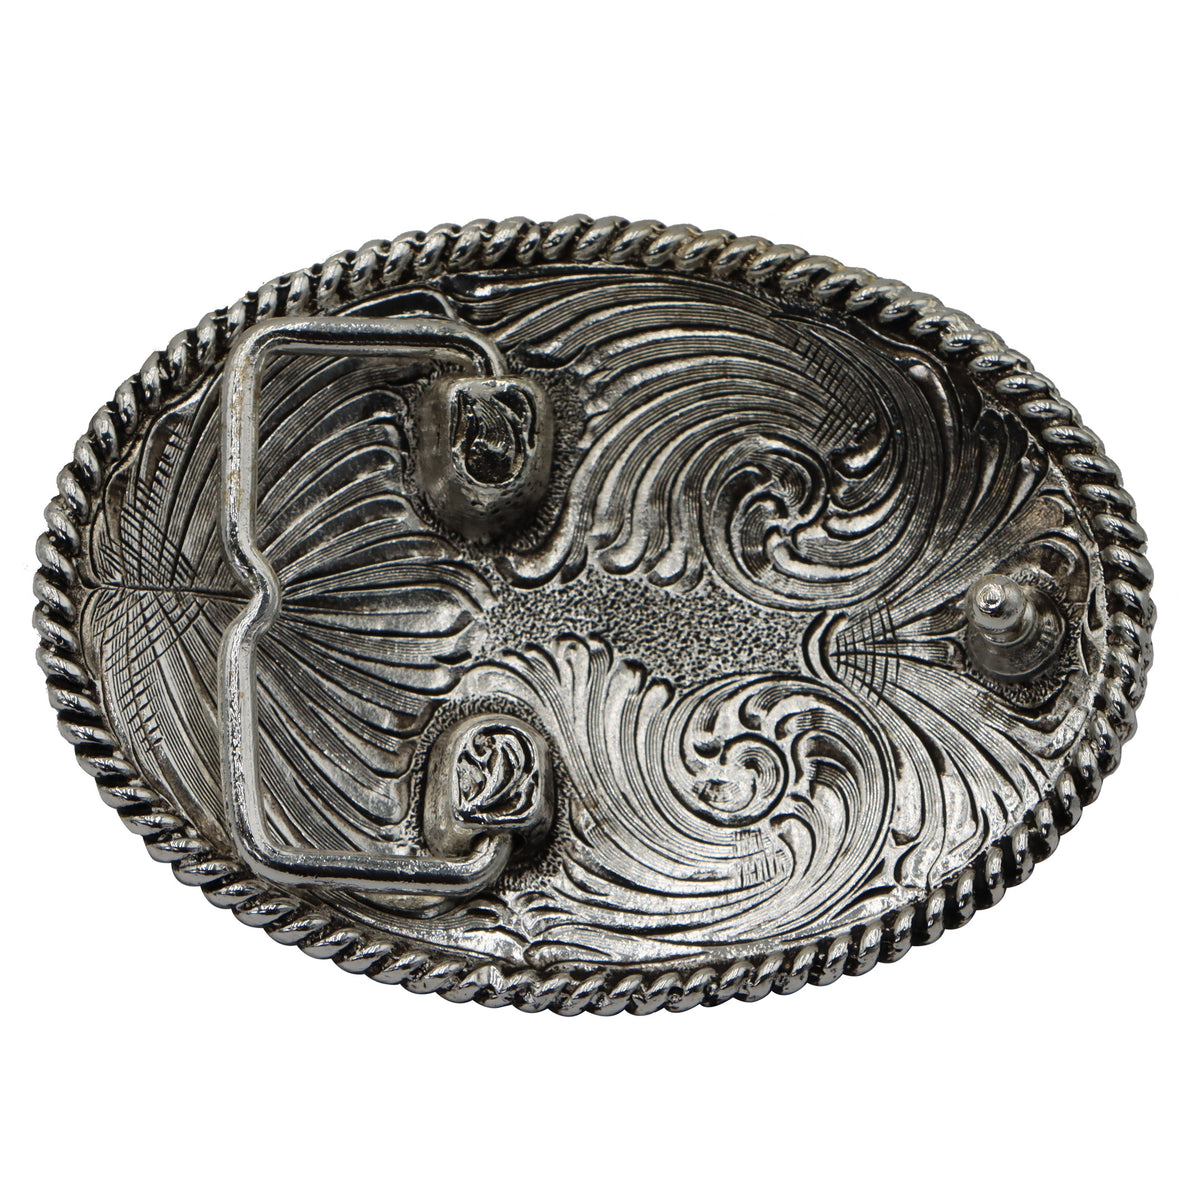 Initial “M” Buckle